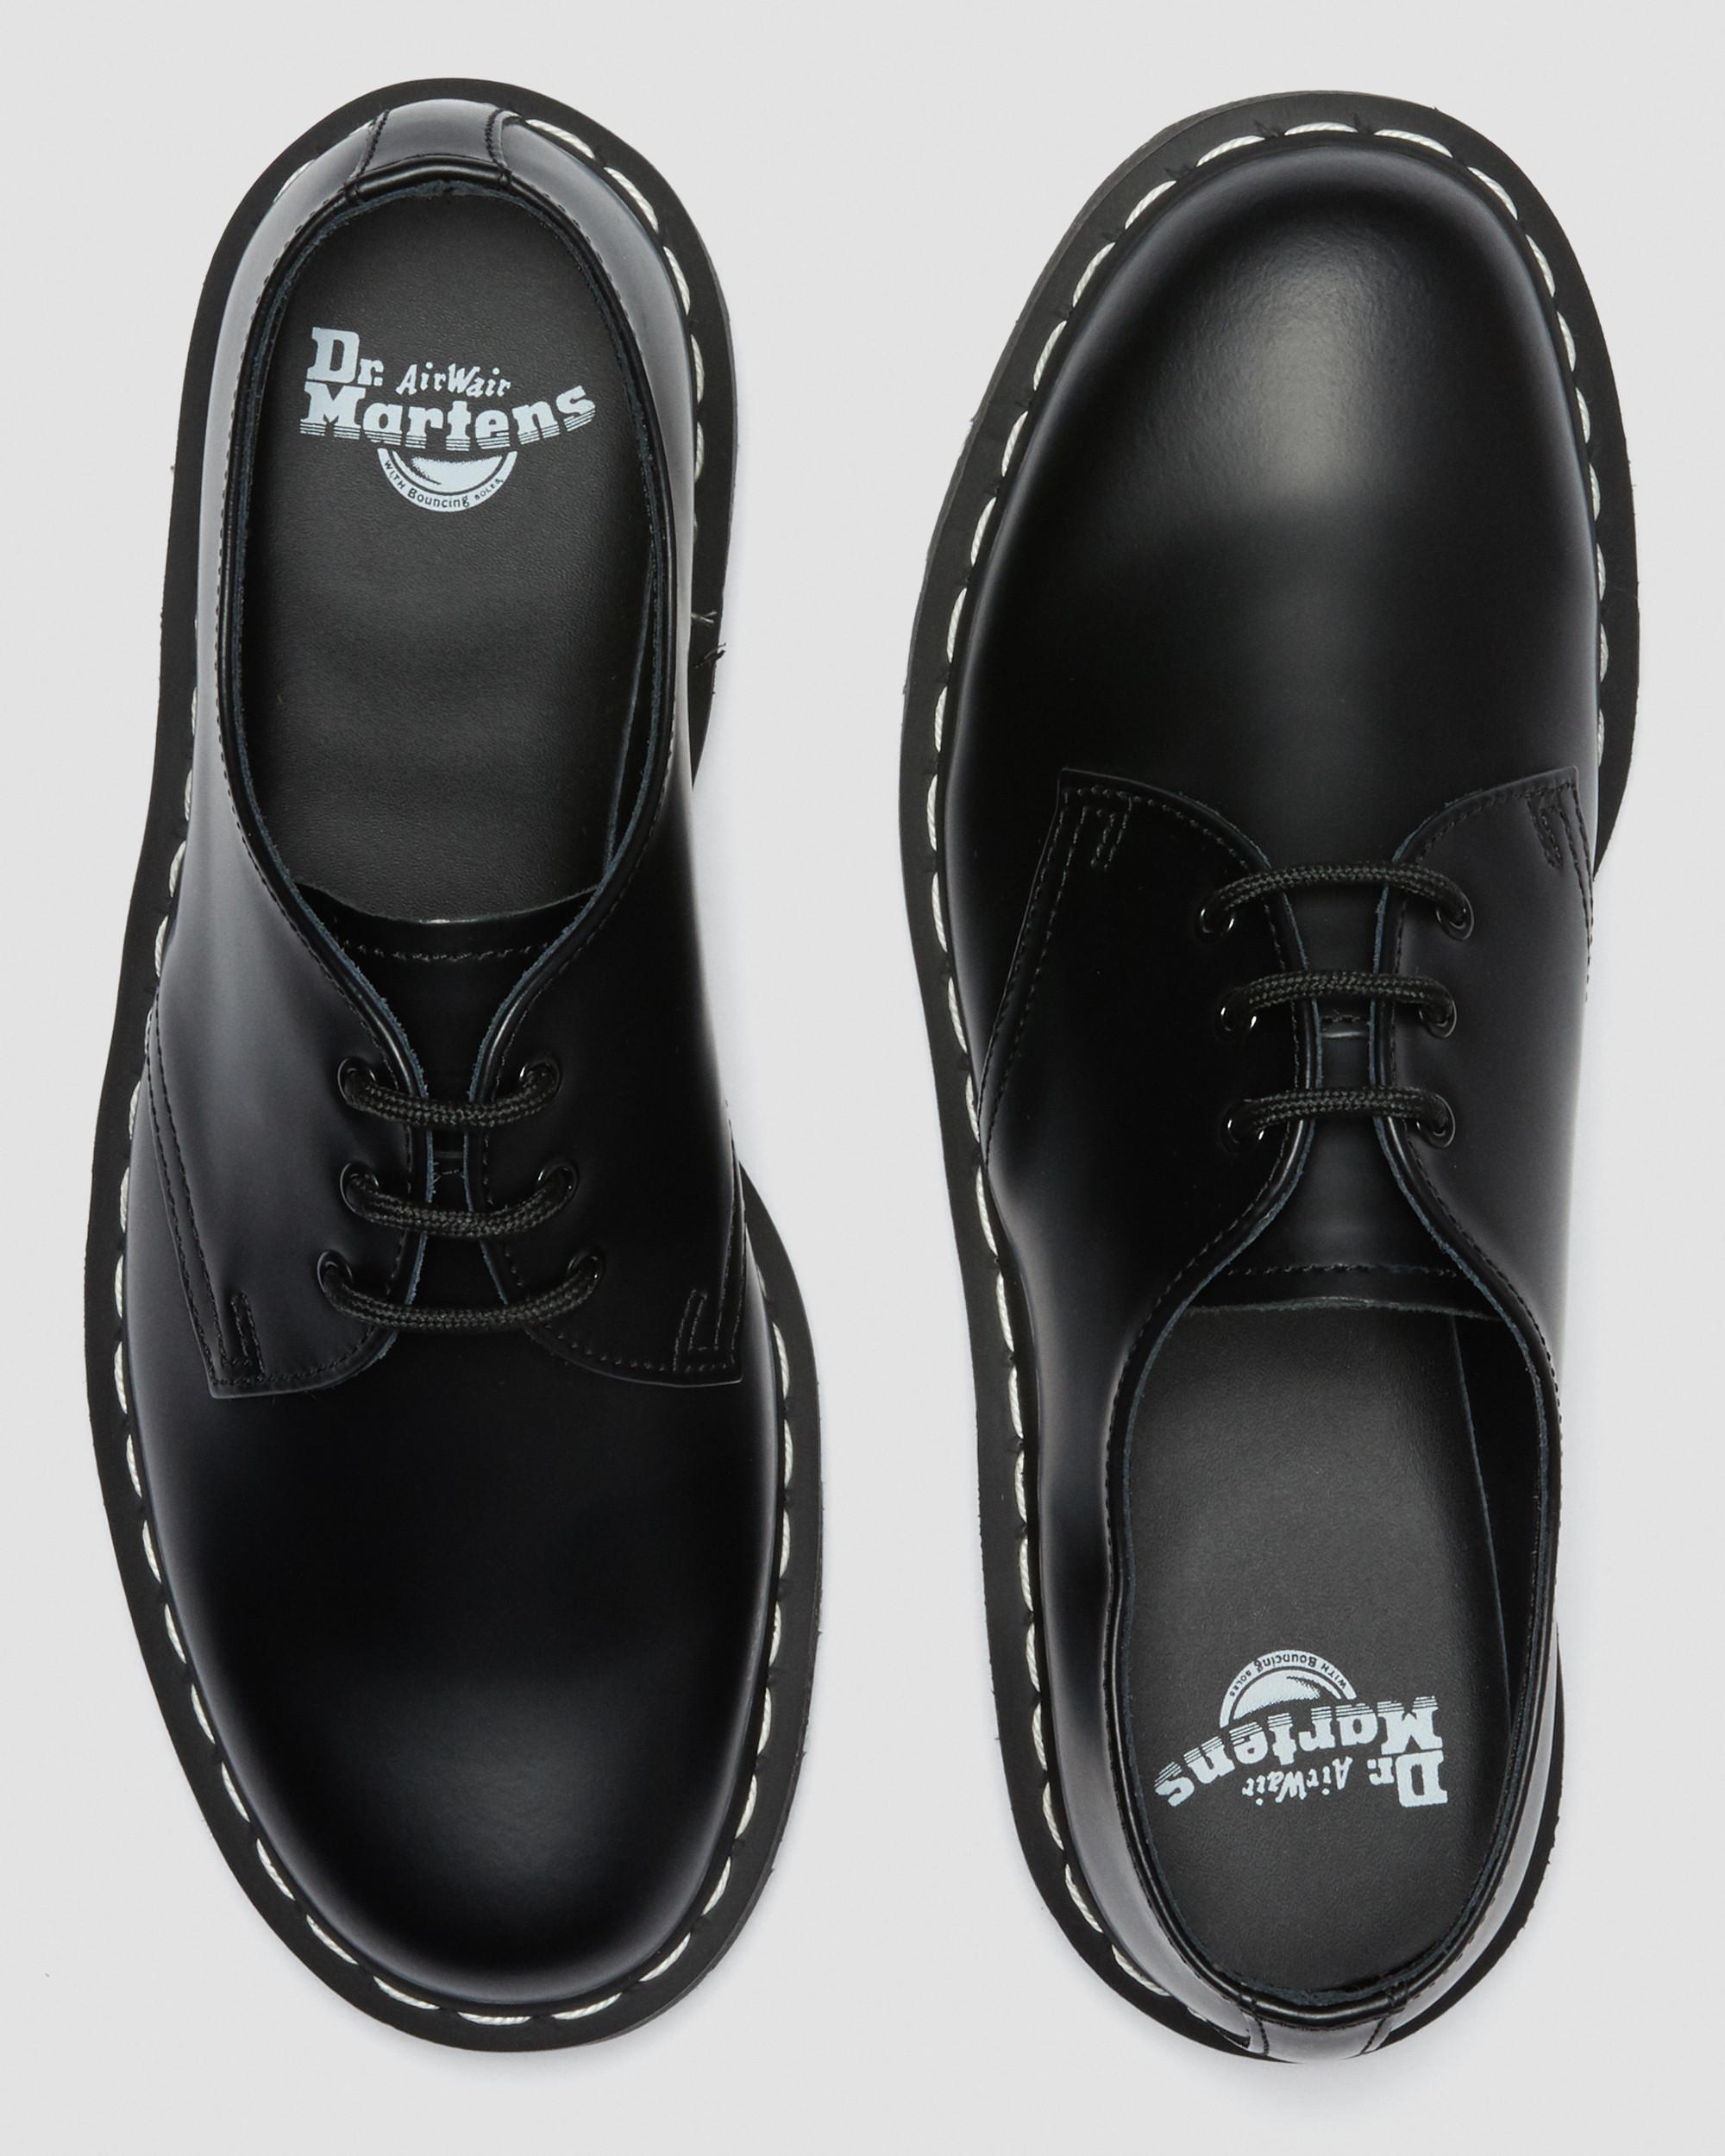 1461 Contrast Stitch Smooth Leather Oxford Shoes1461 Contrast Stitch Smooth Leather Oxford Shoes Dr. Martens